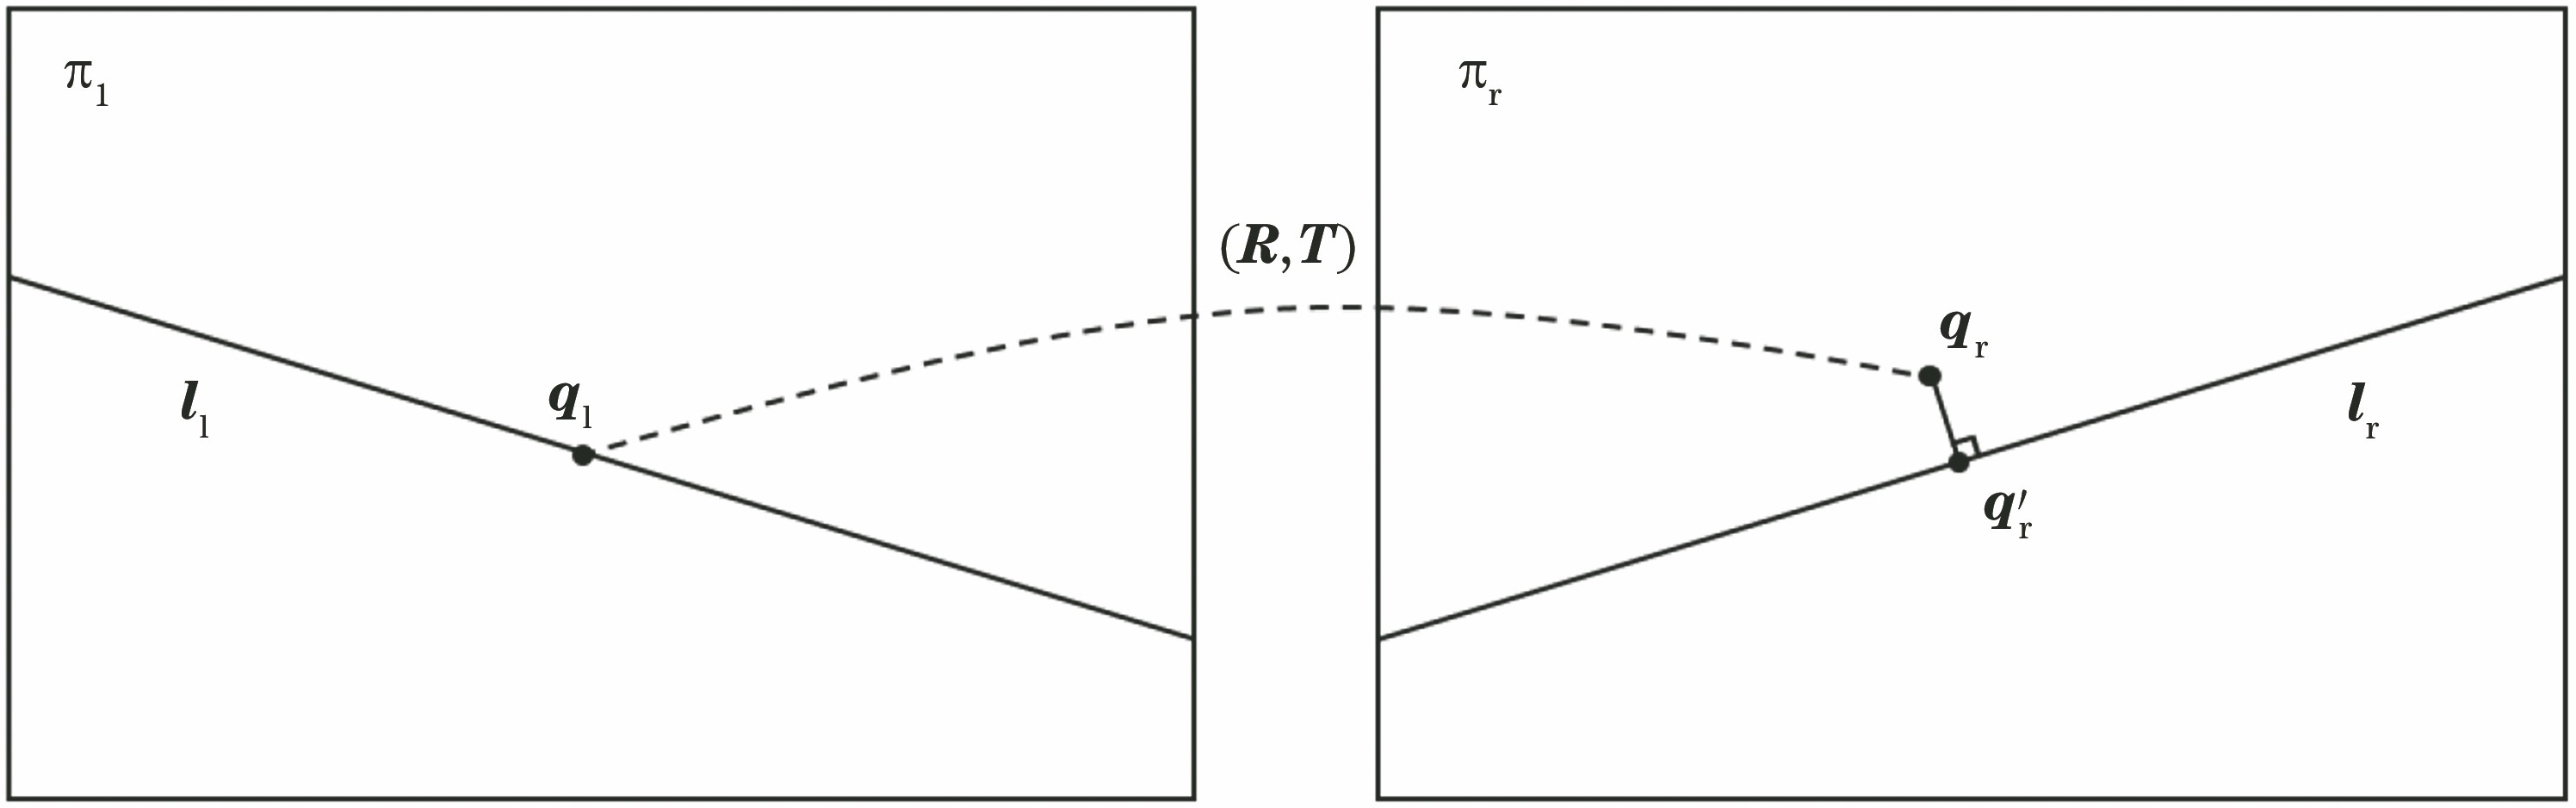 Matching relationship between measured corner points of left image and its right epipolar line